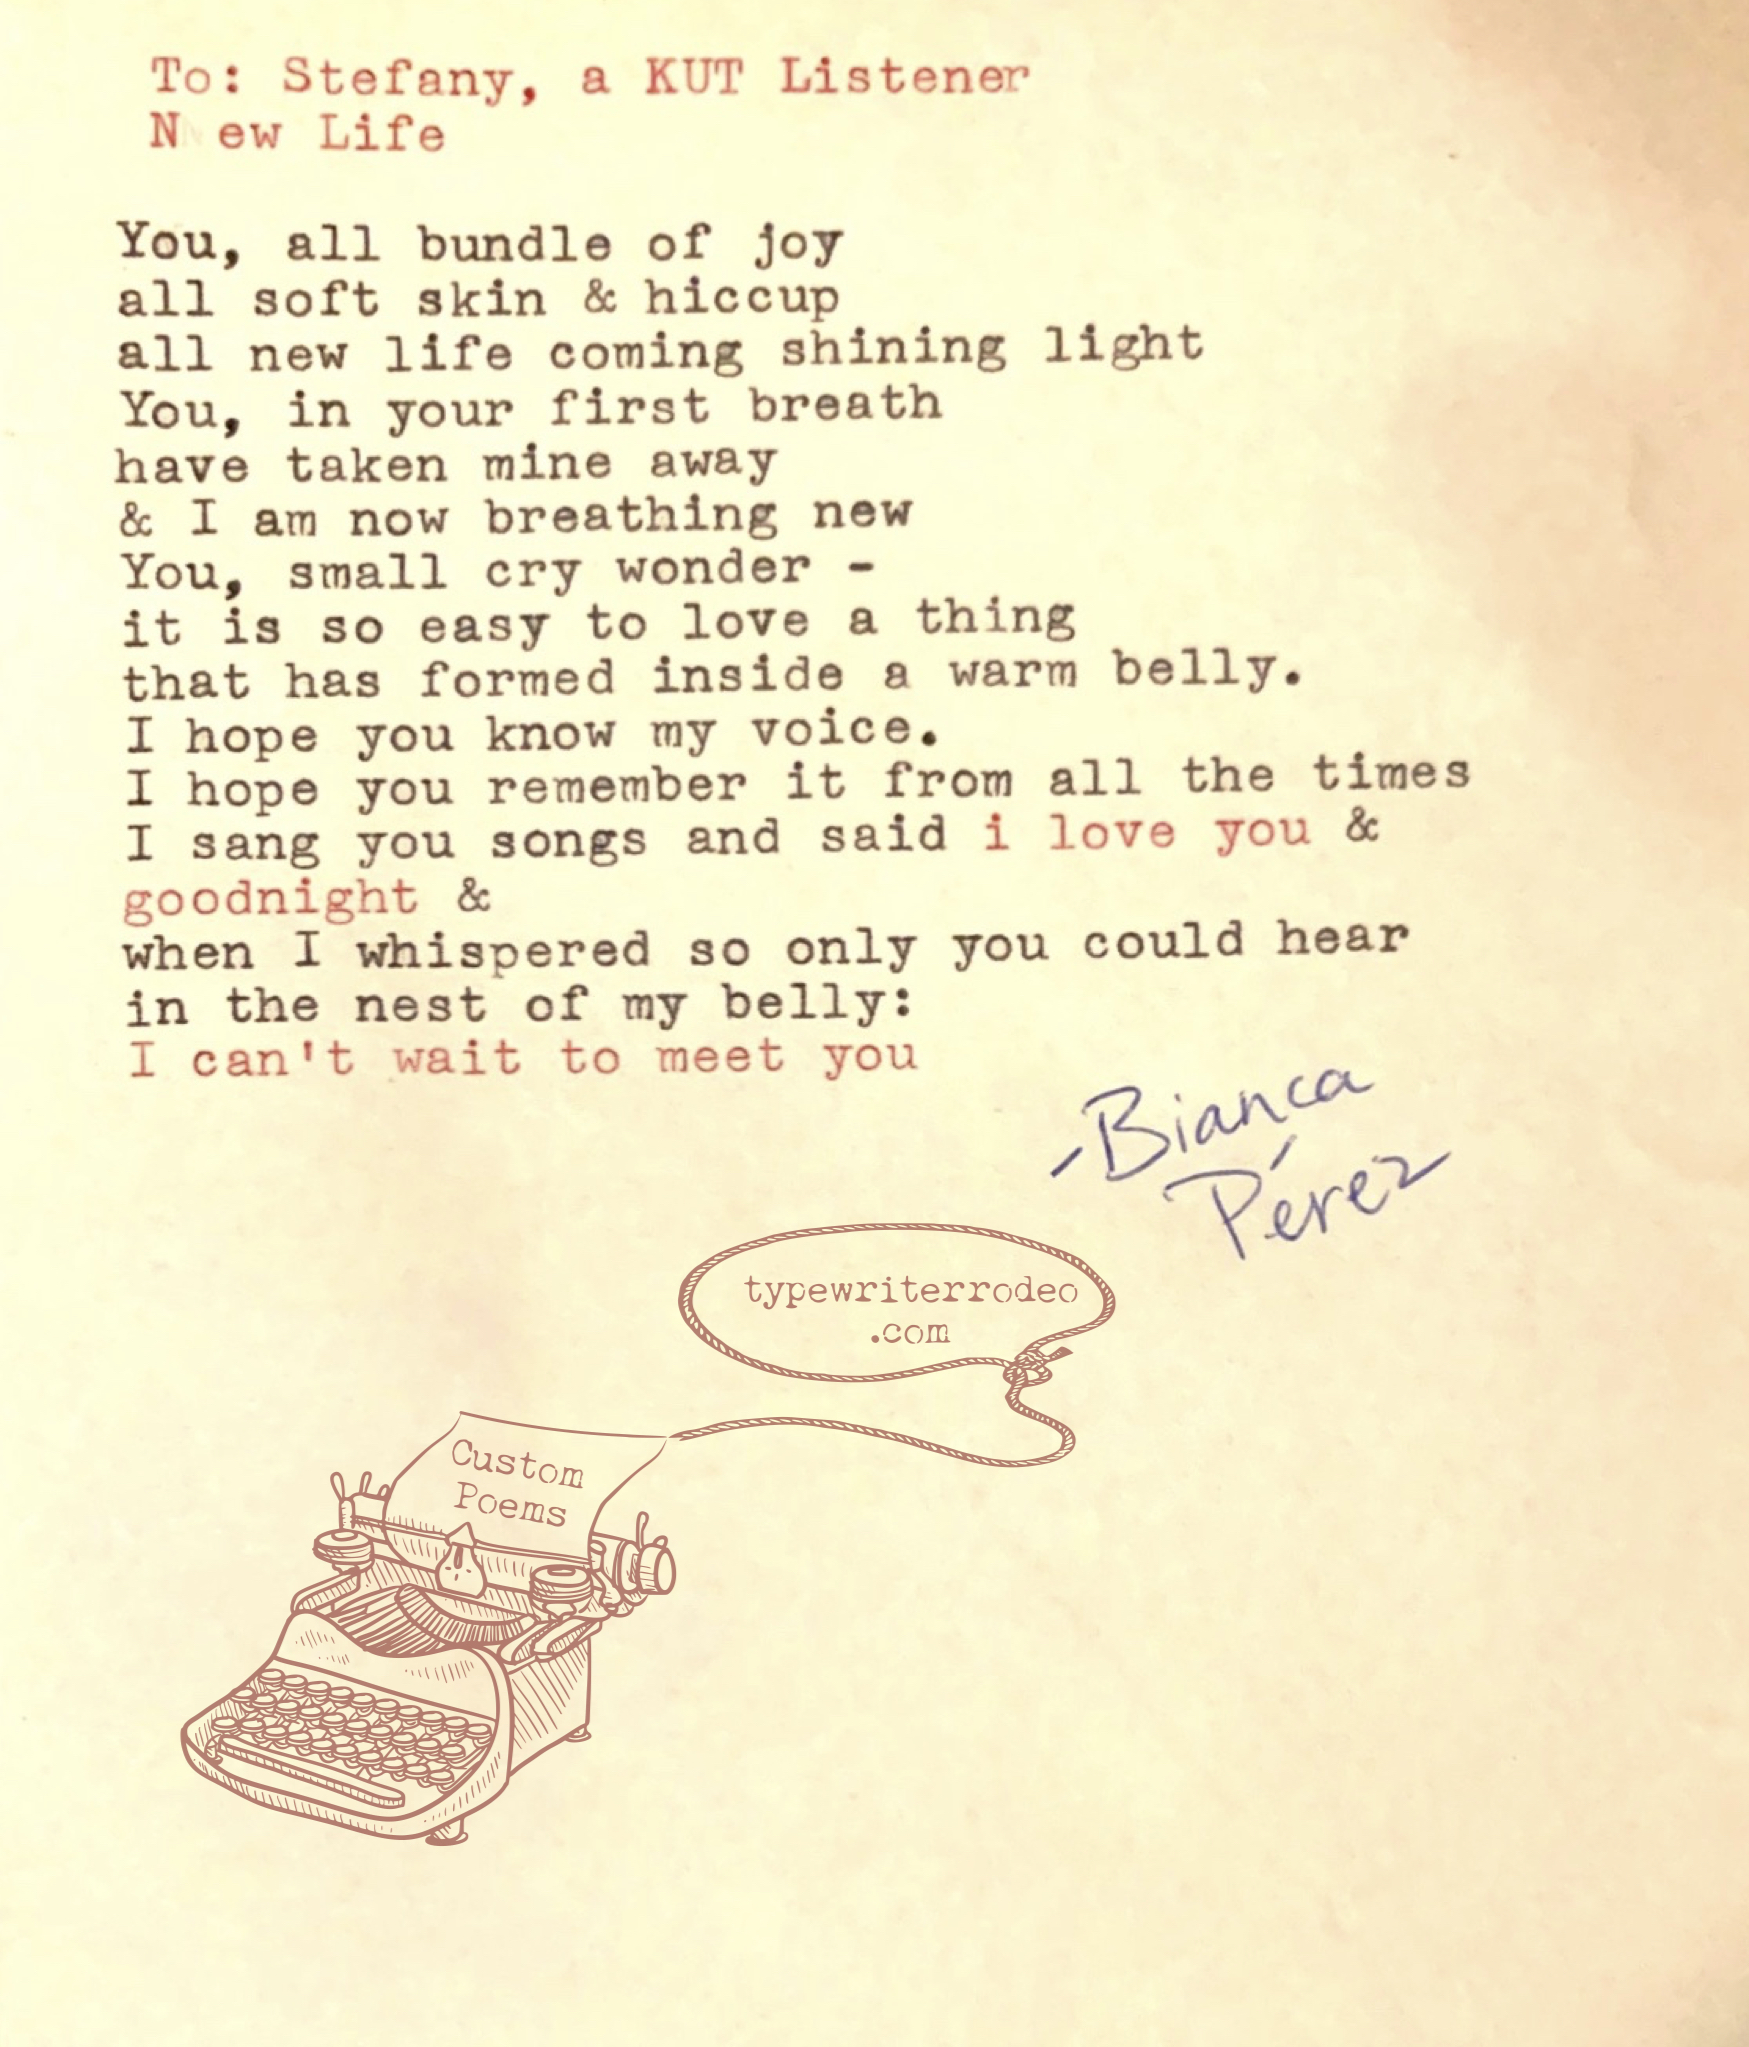 an image of the typewritten poem